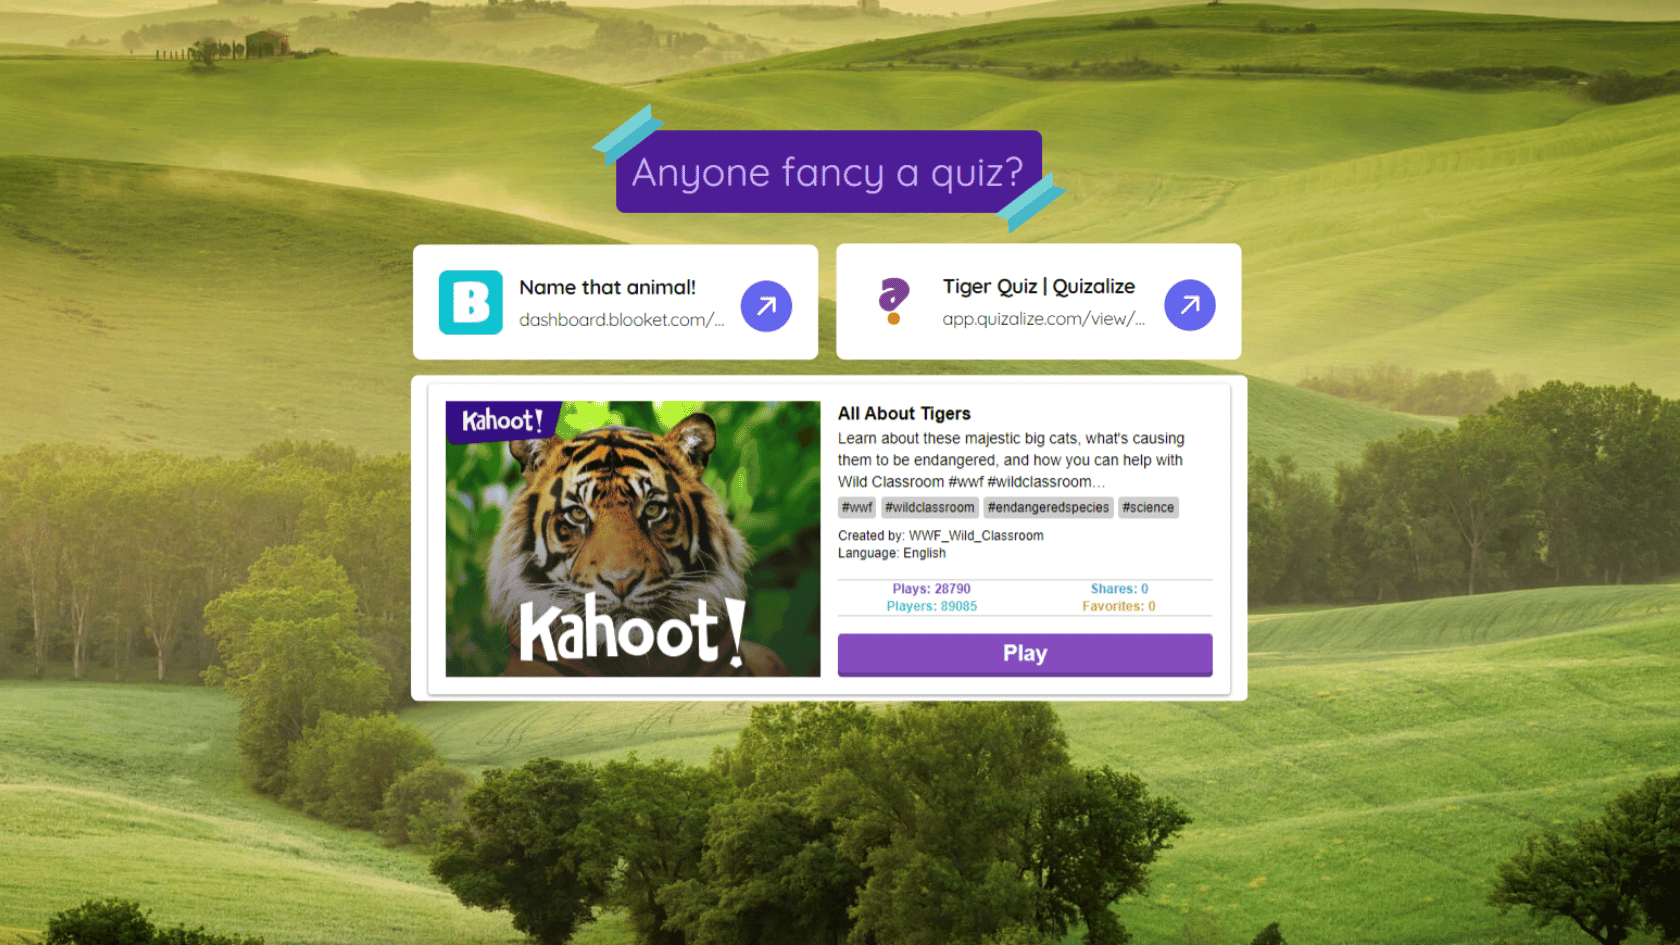 This visual shows a Classroomscreen with Kahoot, Quizalize and Blooket, along with a few widgets and stickers.